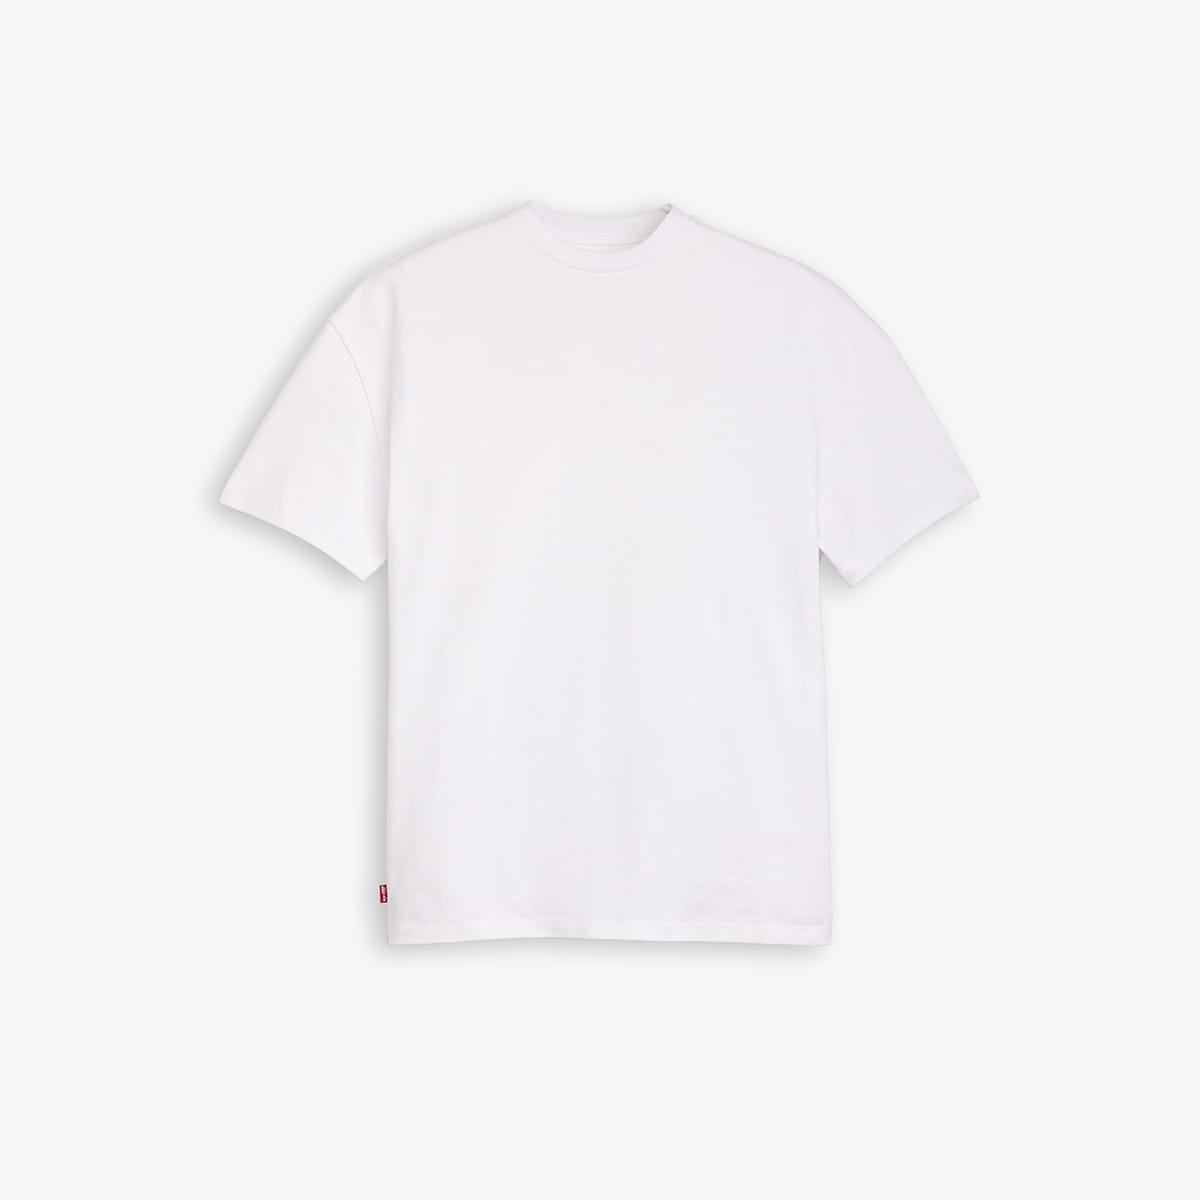 Levi's x BEAMS Stay Loose T-Shirt (White Multi) | END. Launches